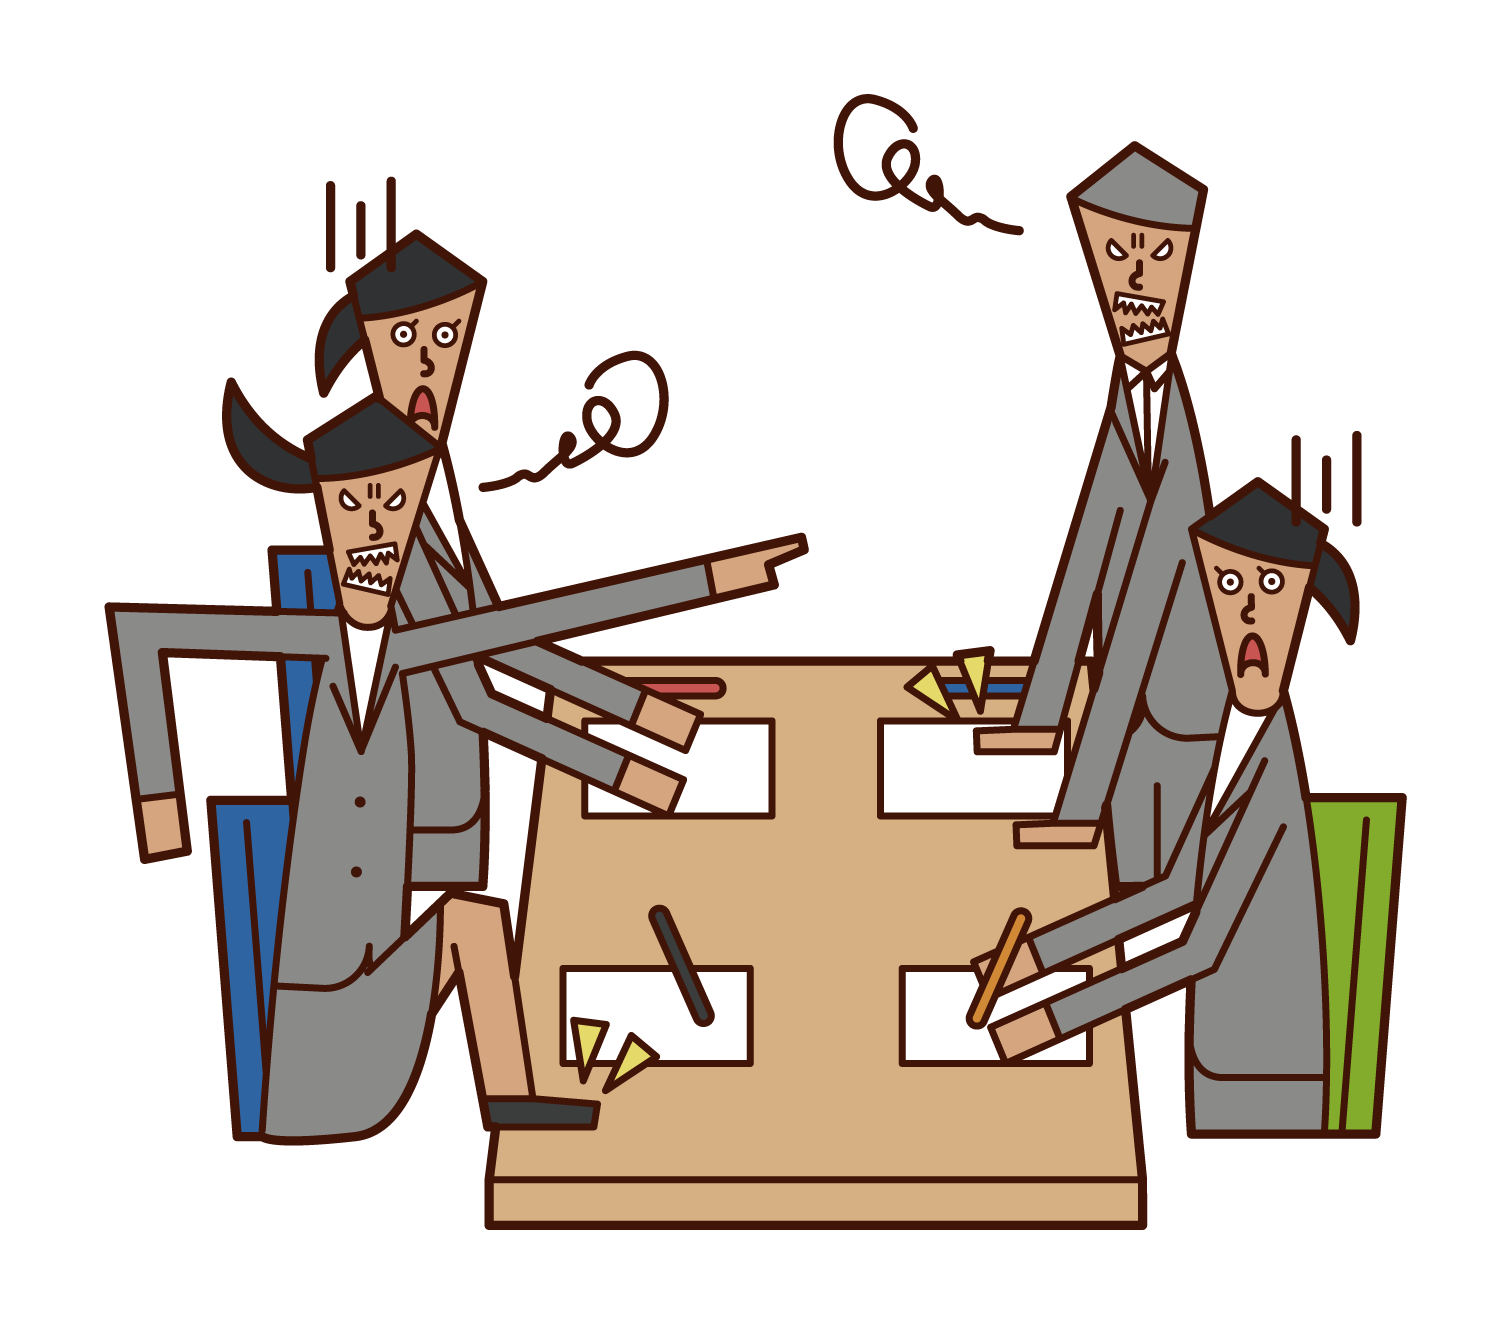 Illustrations of people fighting at a meeting